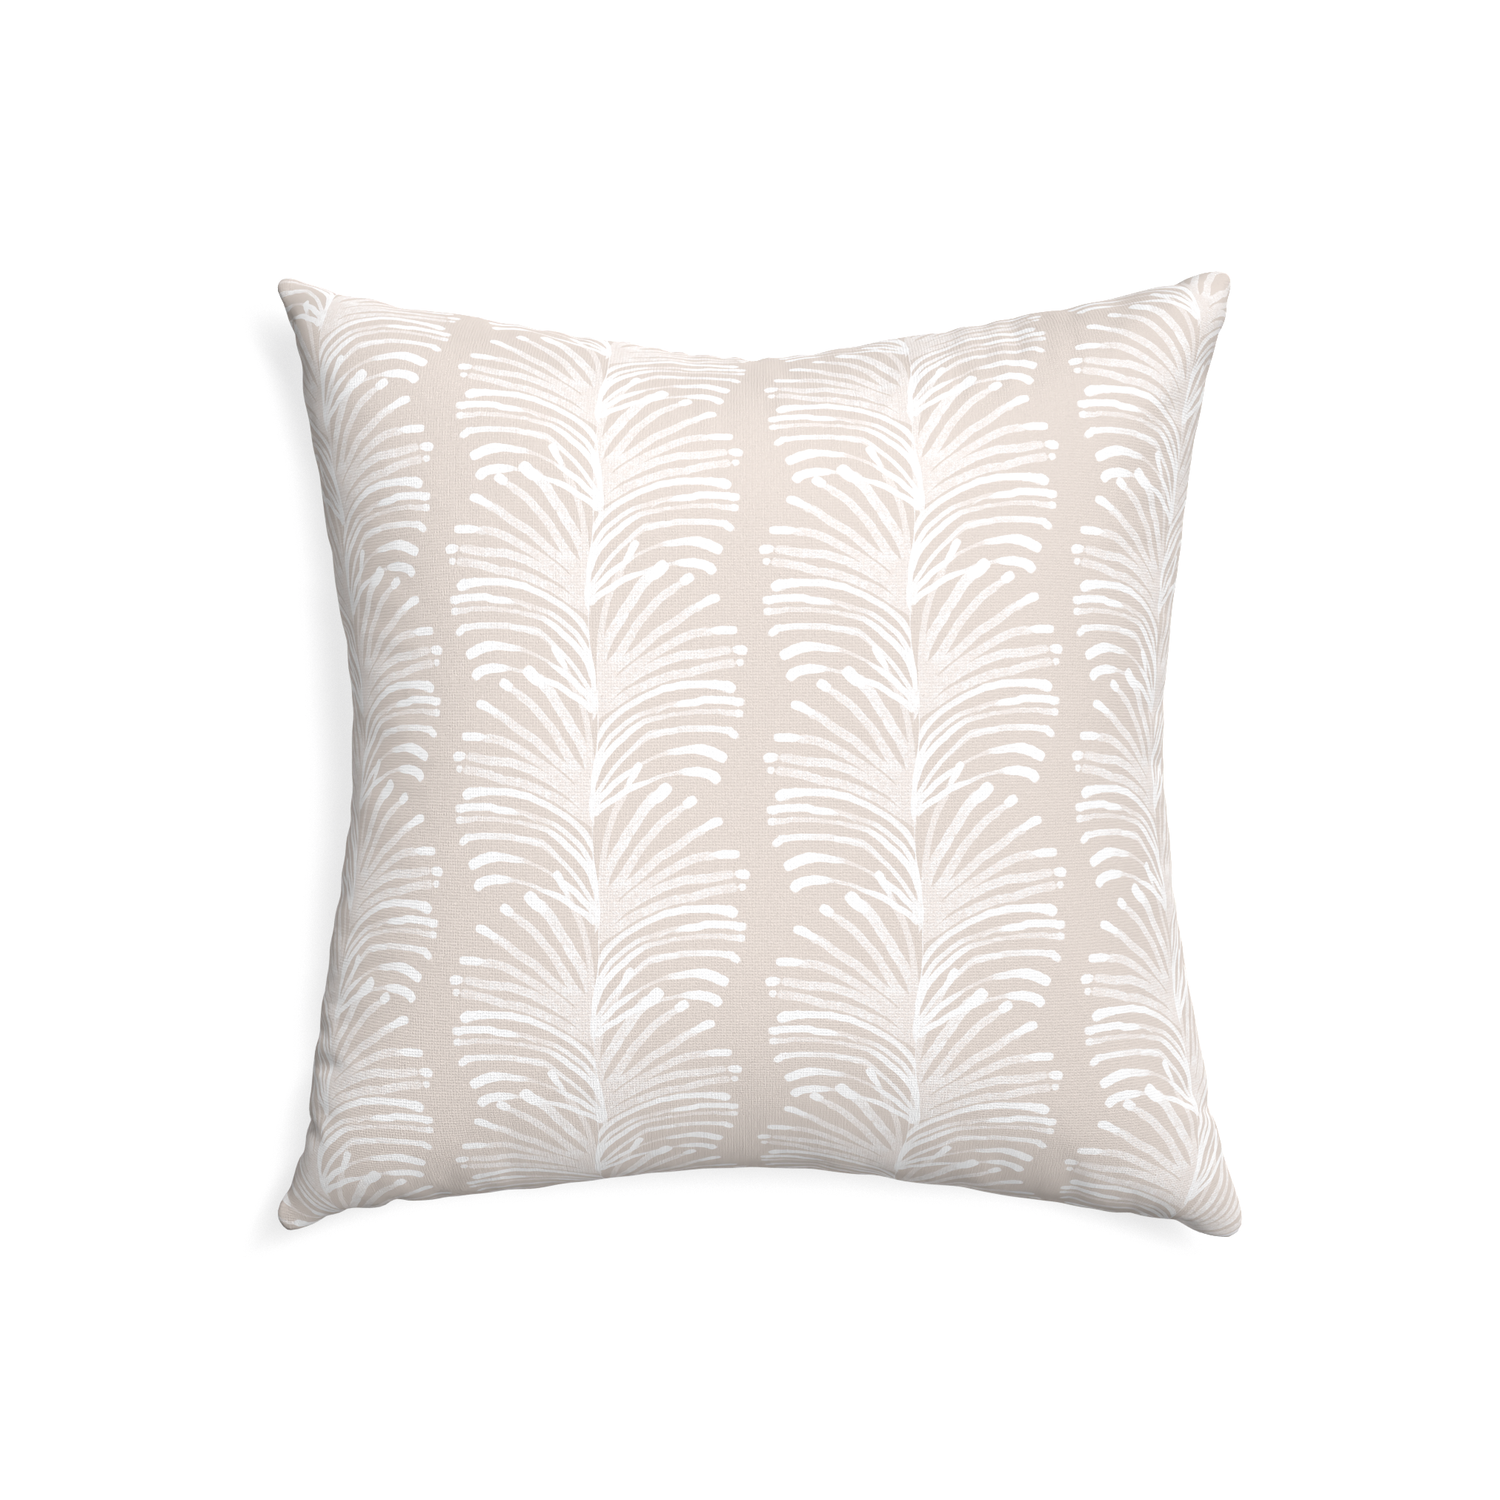 22-square emma sand custom sand colored botanical stripepillow with none on white background